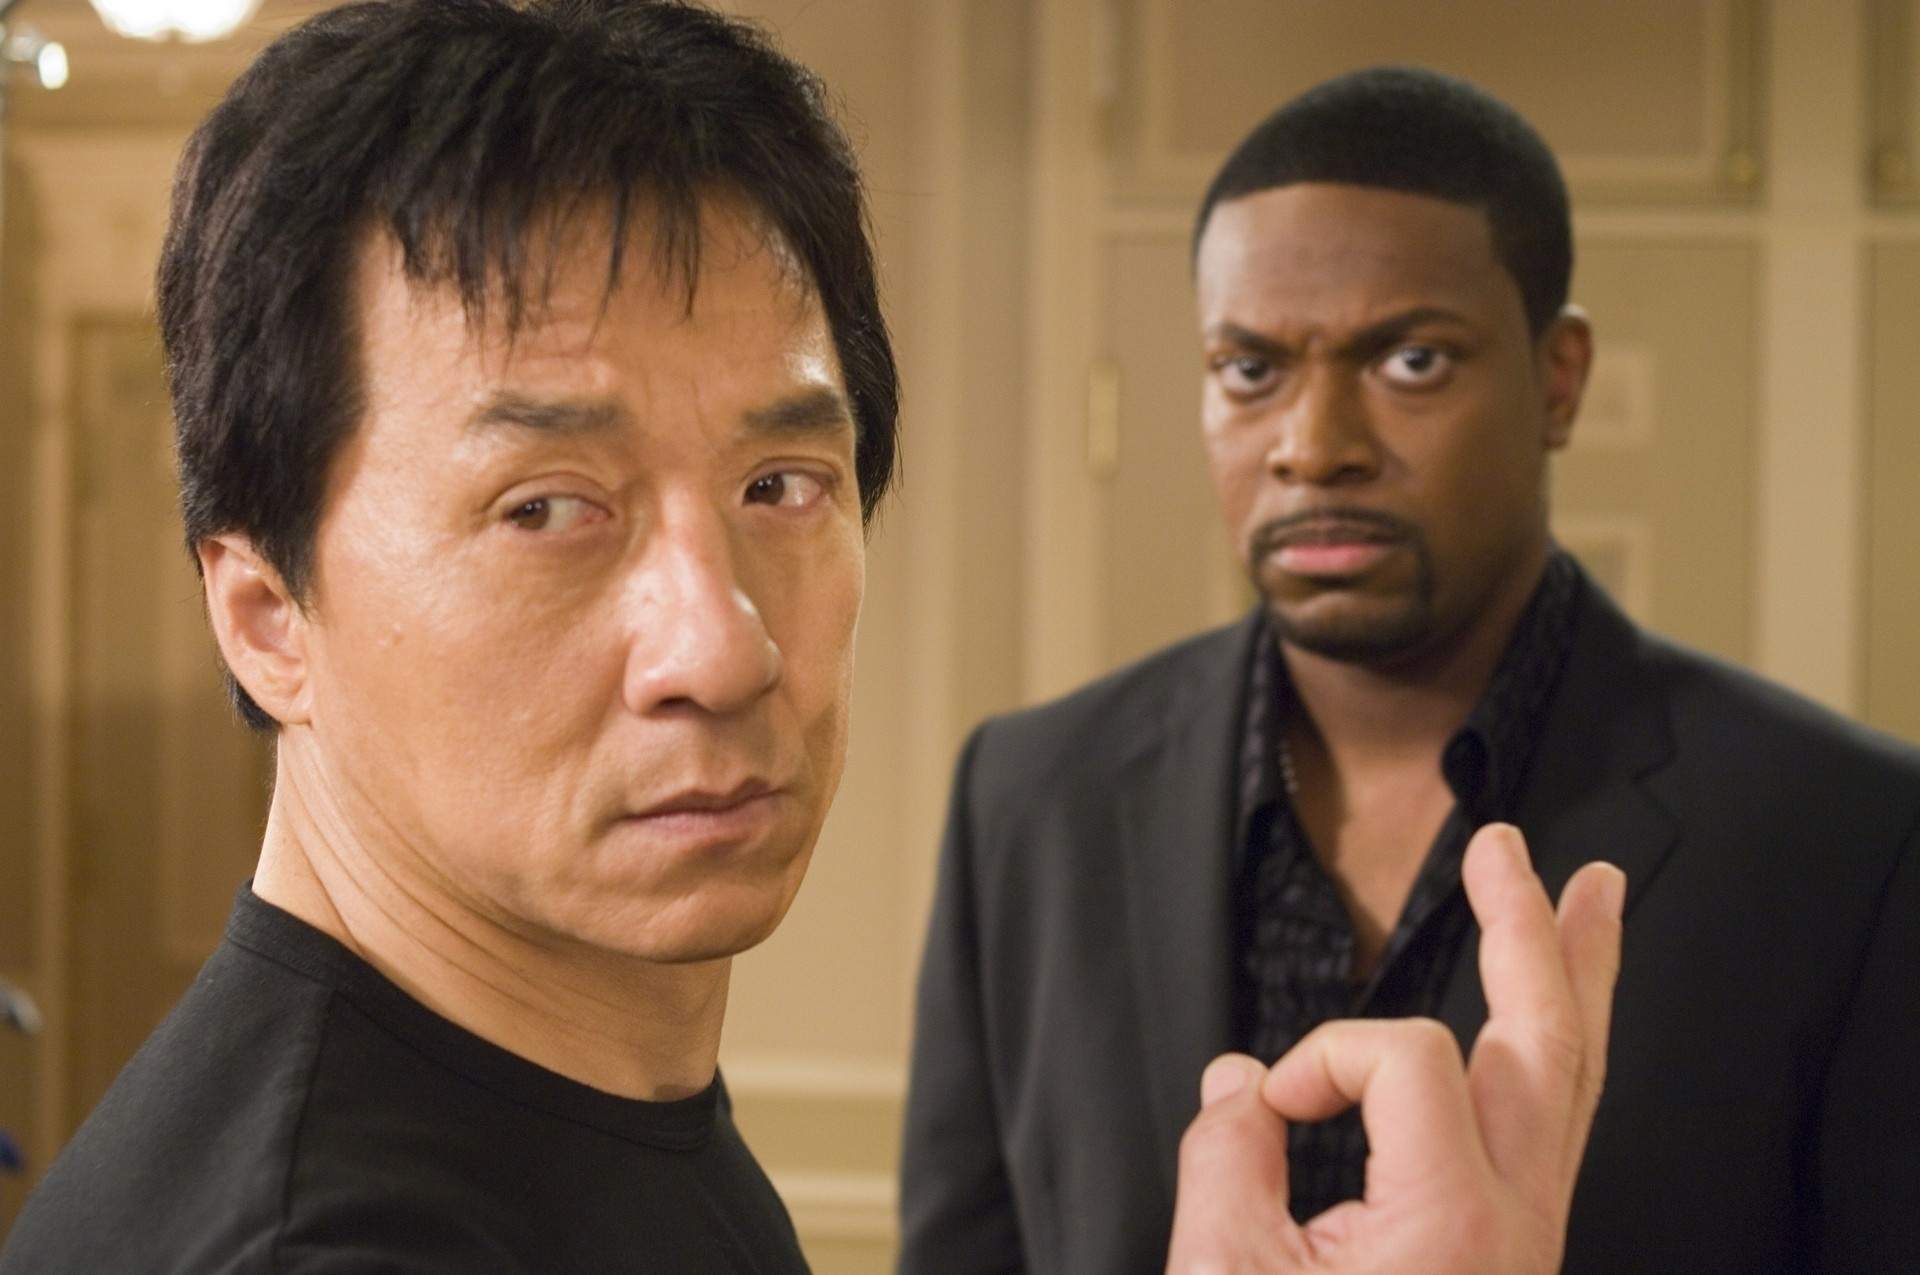 Rush Hour movies, Chris Tucker, Action-packed comedy, Dynamic duo, 1920x1280 HD Desktop